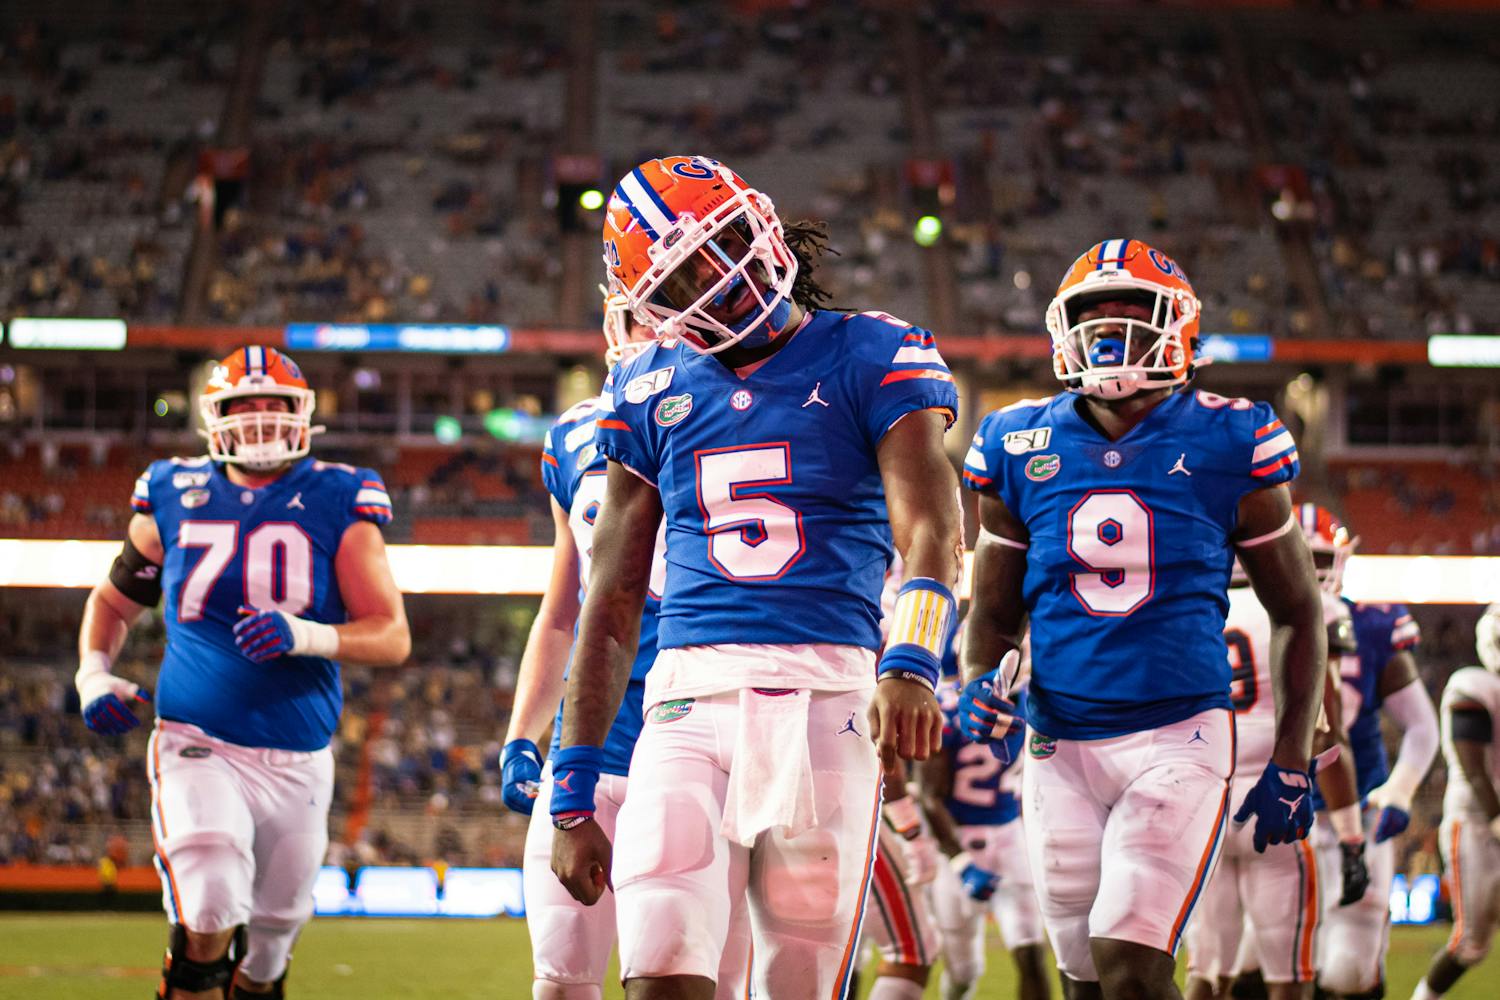 Florida quarterback Emory Jones (5, pictured) struts after scoring a touchdown. Jones finally gets the call to start the 2021 season after three years in backup duty.